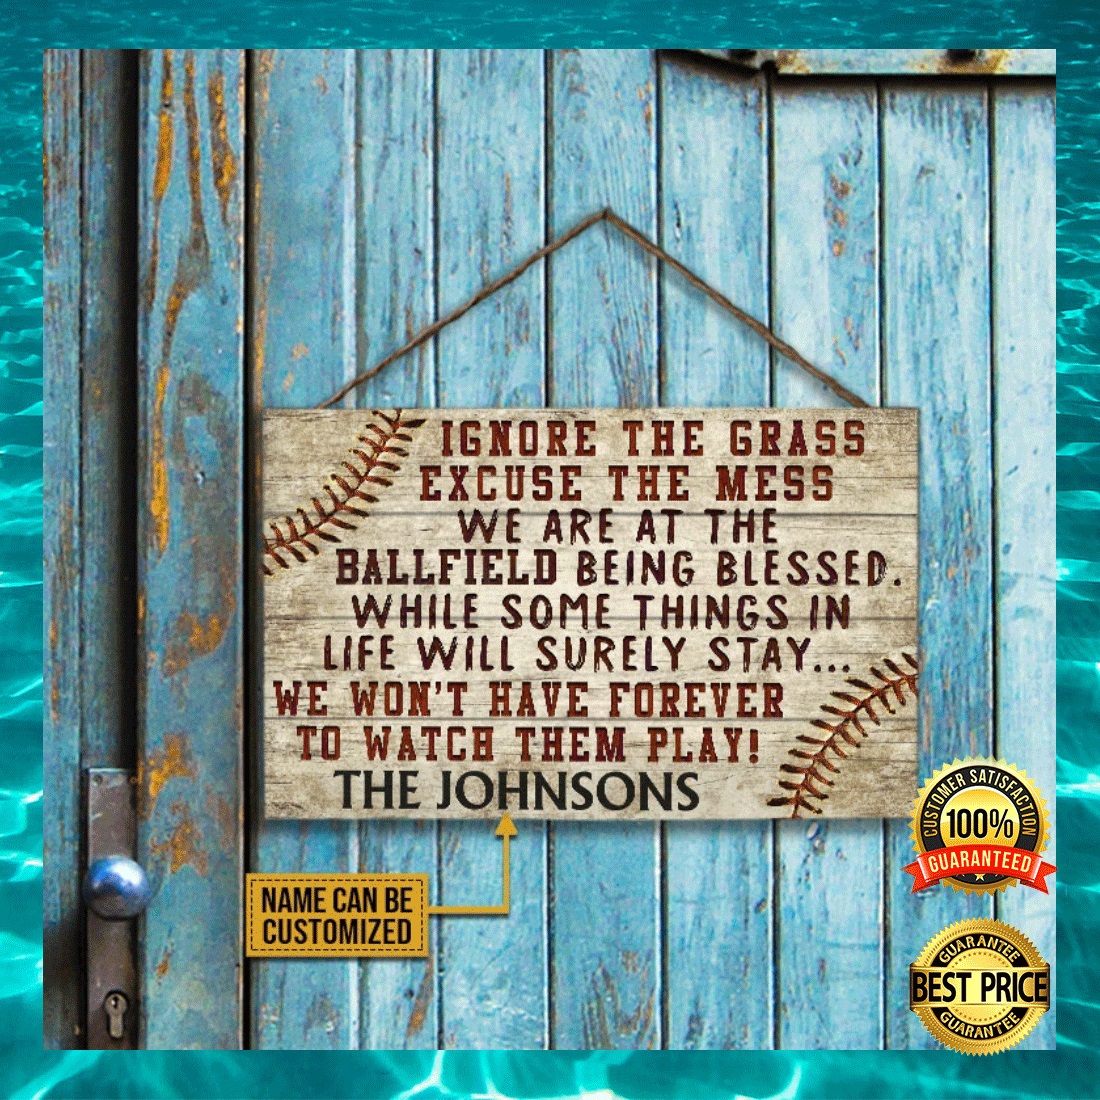 Personalized ignore the grass excuse the mess we are at the ballfield being blessed door sign 11